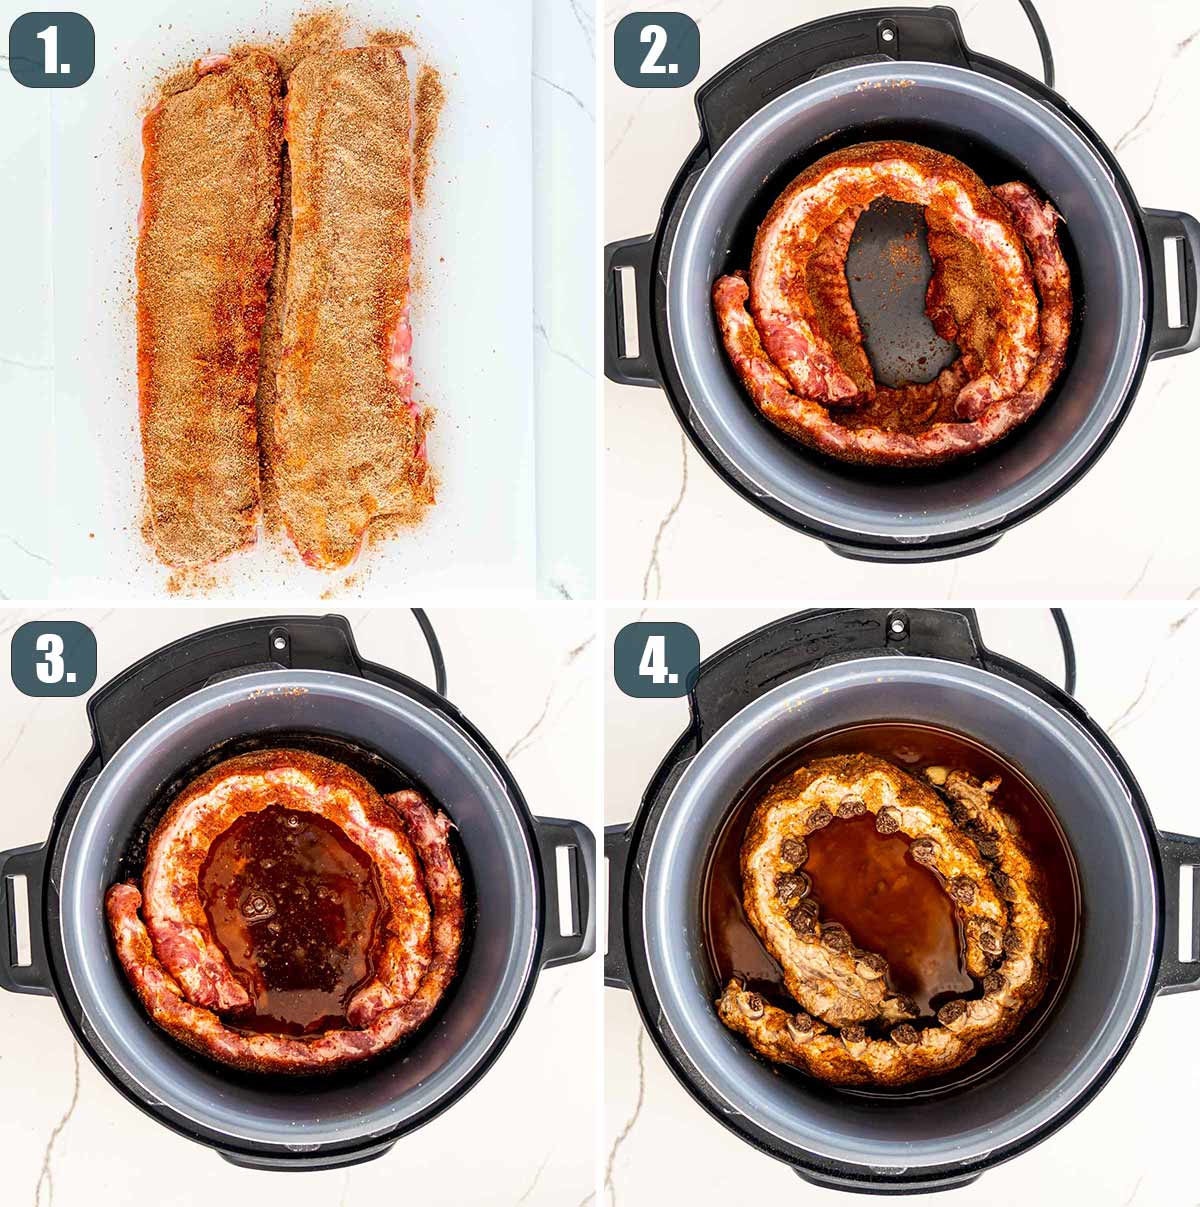 process shots showing how to make instant pot bbq ribs.